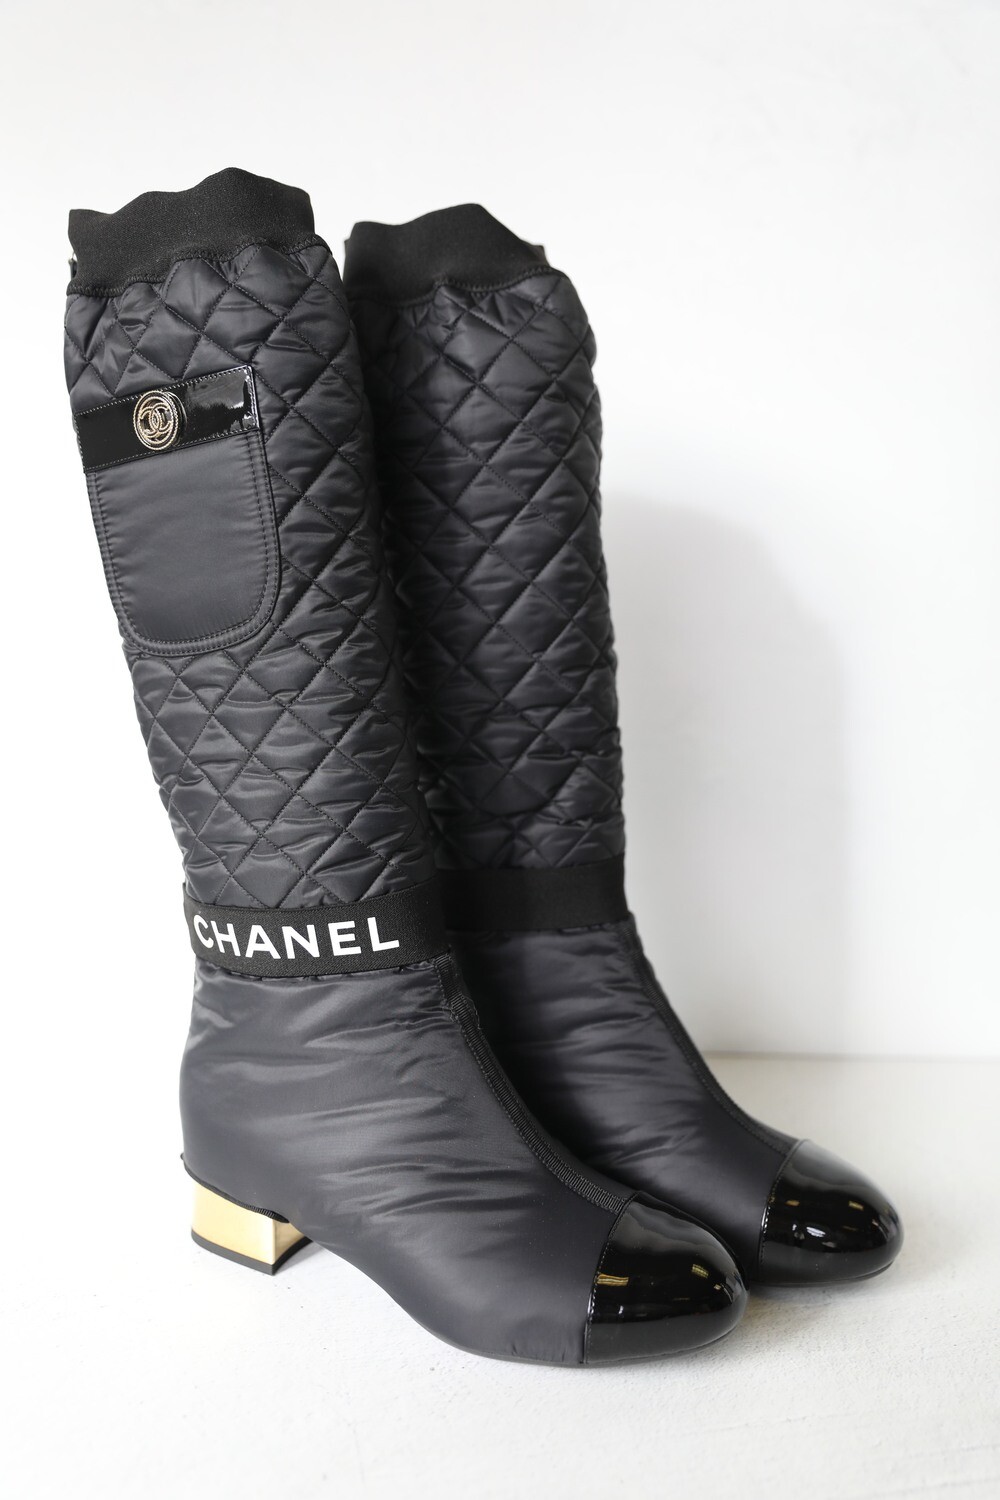 Chanel Shoes Boots, Tall with Gold, Size 38.5, New in Box WA001